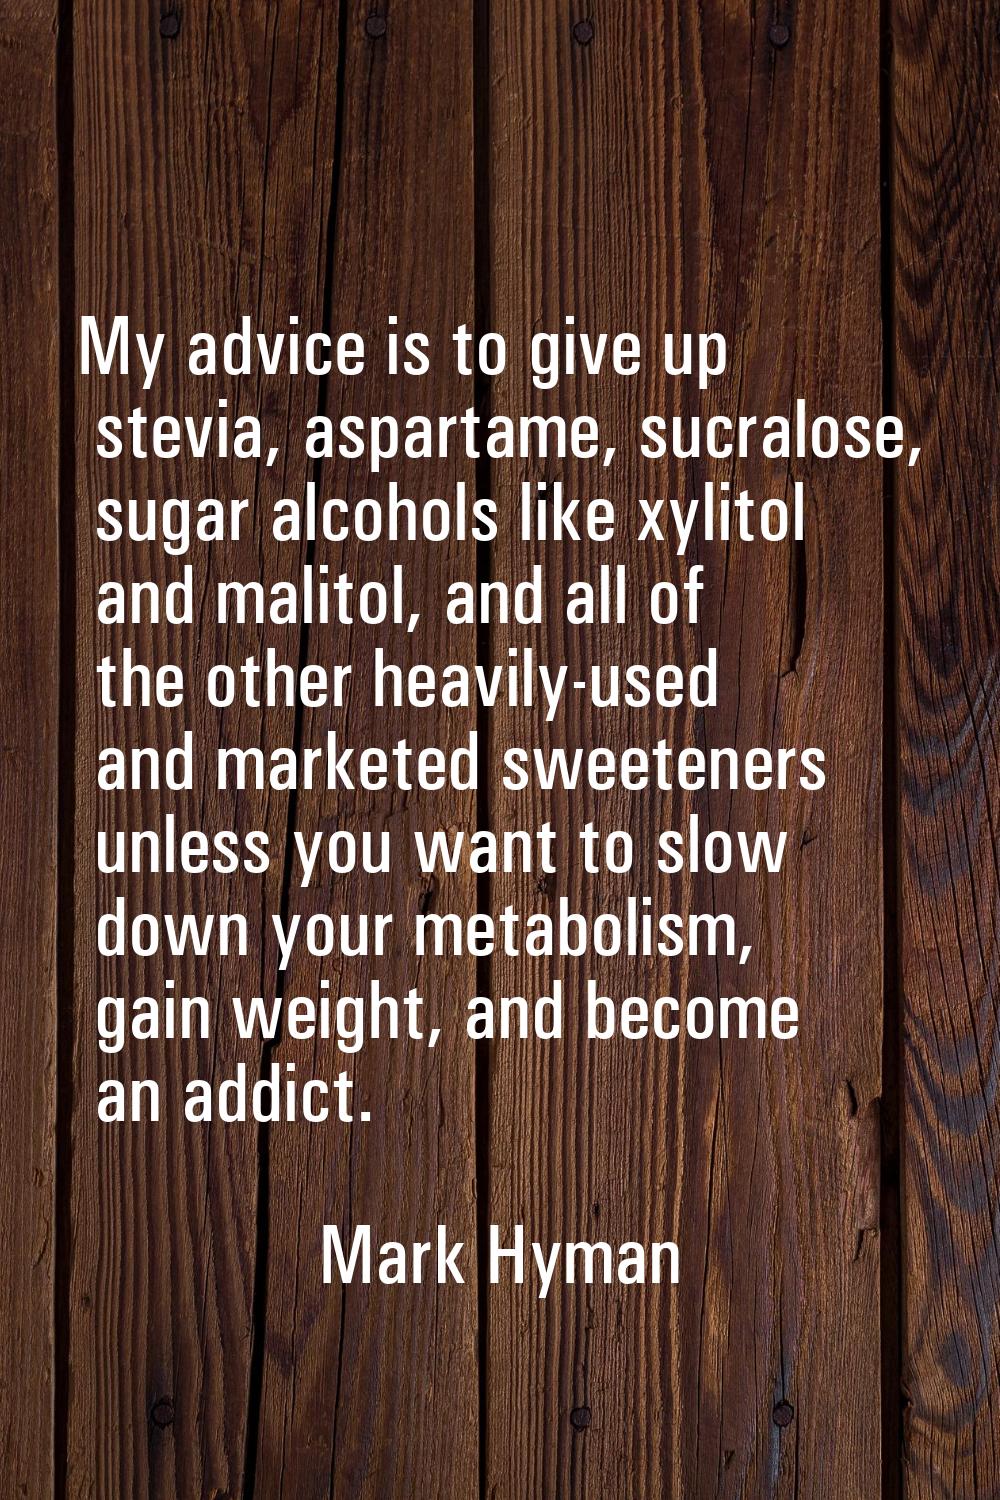 My advice is to give up stevia, aspartame, sucralose, sugar alcohols like xylitol and malitol, and 